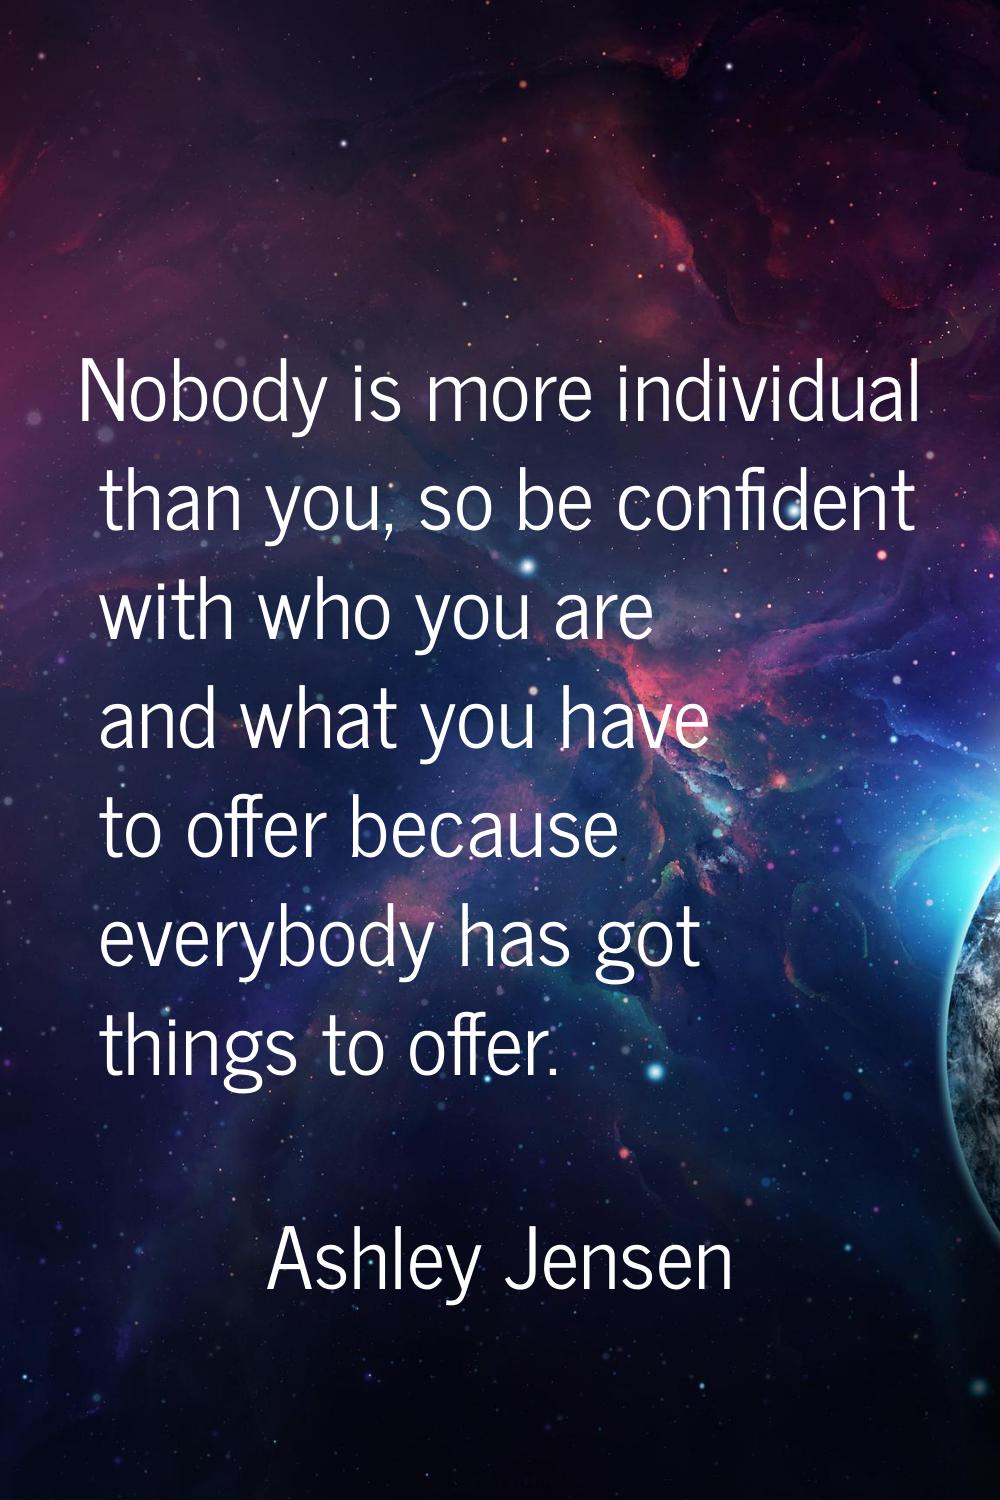 Nobody is more individual than you, so be confident with who you are and what you have to offer bec